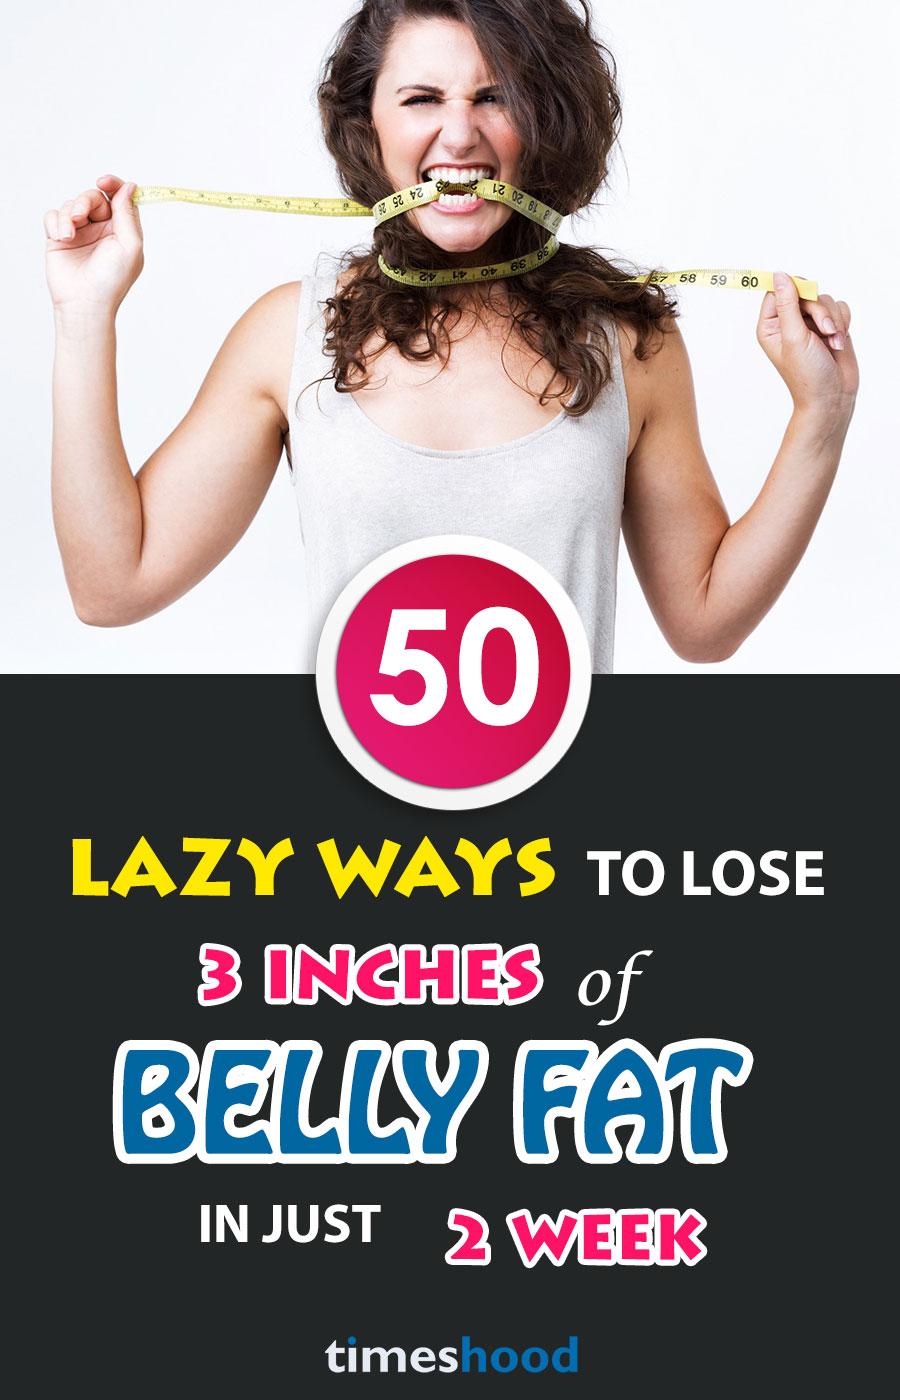 How to lose weight easily? Try these 50 lazy ways to lose 3 inches of belly fat within 2 weeks. Lose up to 10 pounds with these easy weight loss tips. Lose 10 pounds within 2 weeks. Get flat belly within 2 weeks. Try these 50 awesome and easy ways to shrink belly fat. Easy flat belly hacks. Lazy girls hacks to lose weight fast. Best fat burning tips for overweight women. Best diet hacks for flat tummy. Flat tummy drinks. Lose 3 inch of belly fat within 2 weeks. Reduce your belly fat fast.